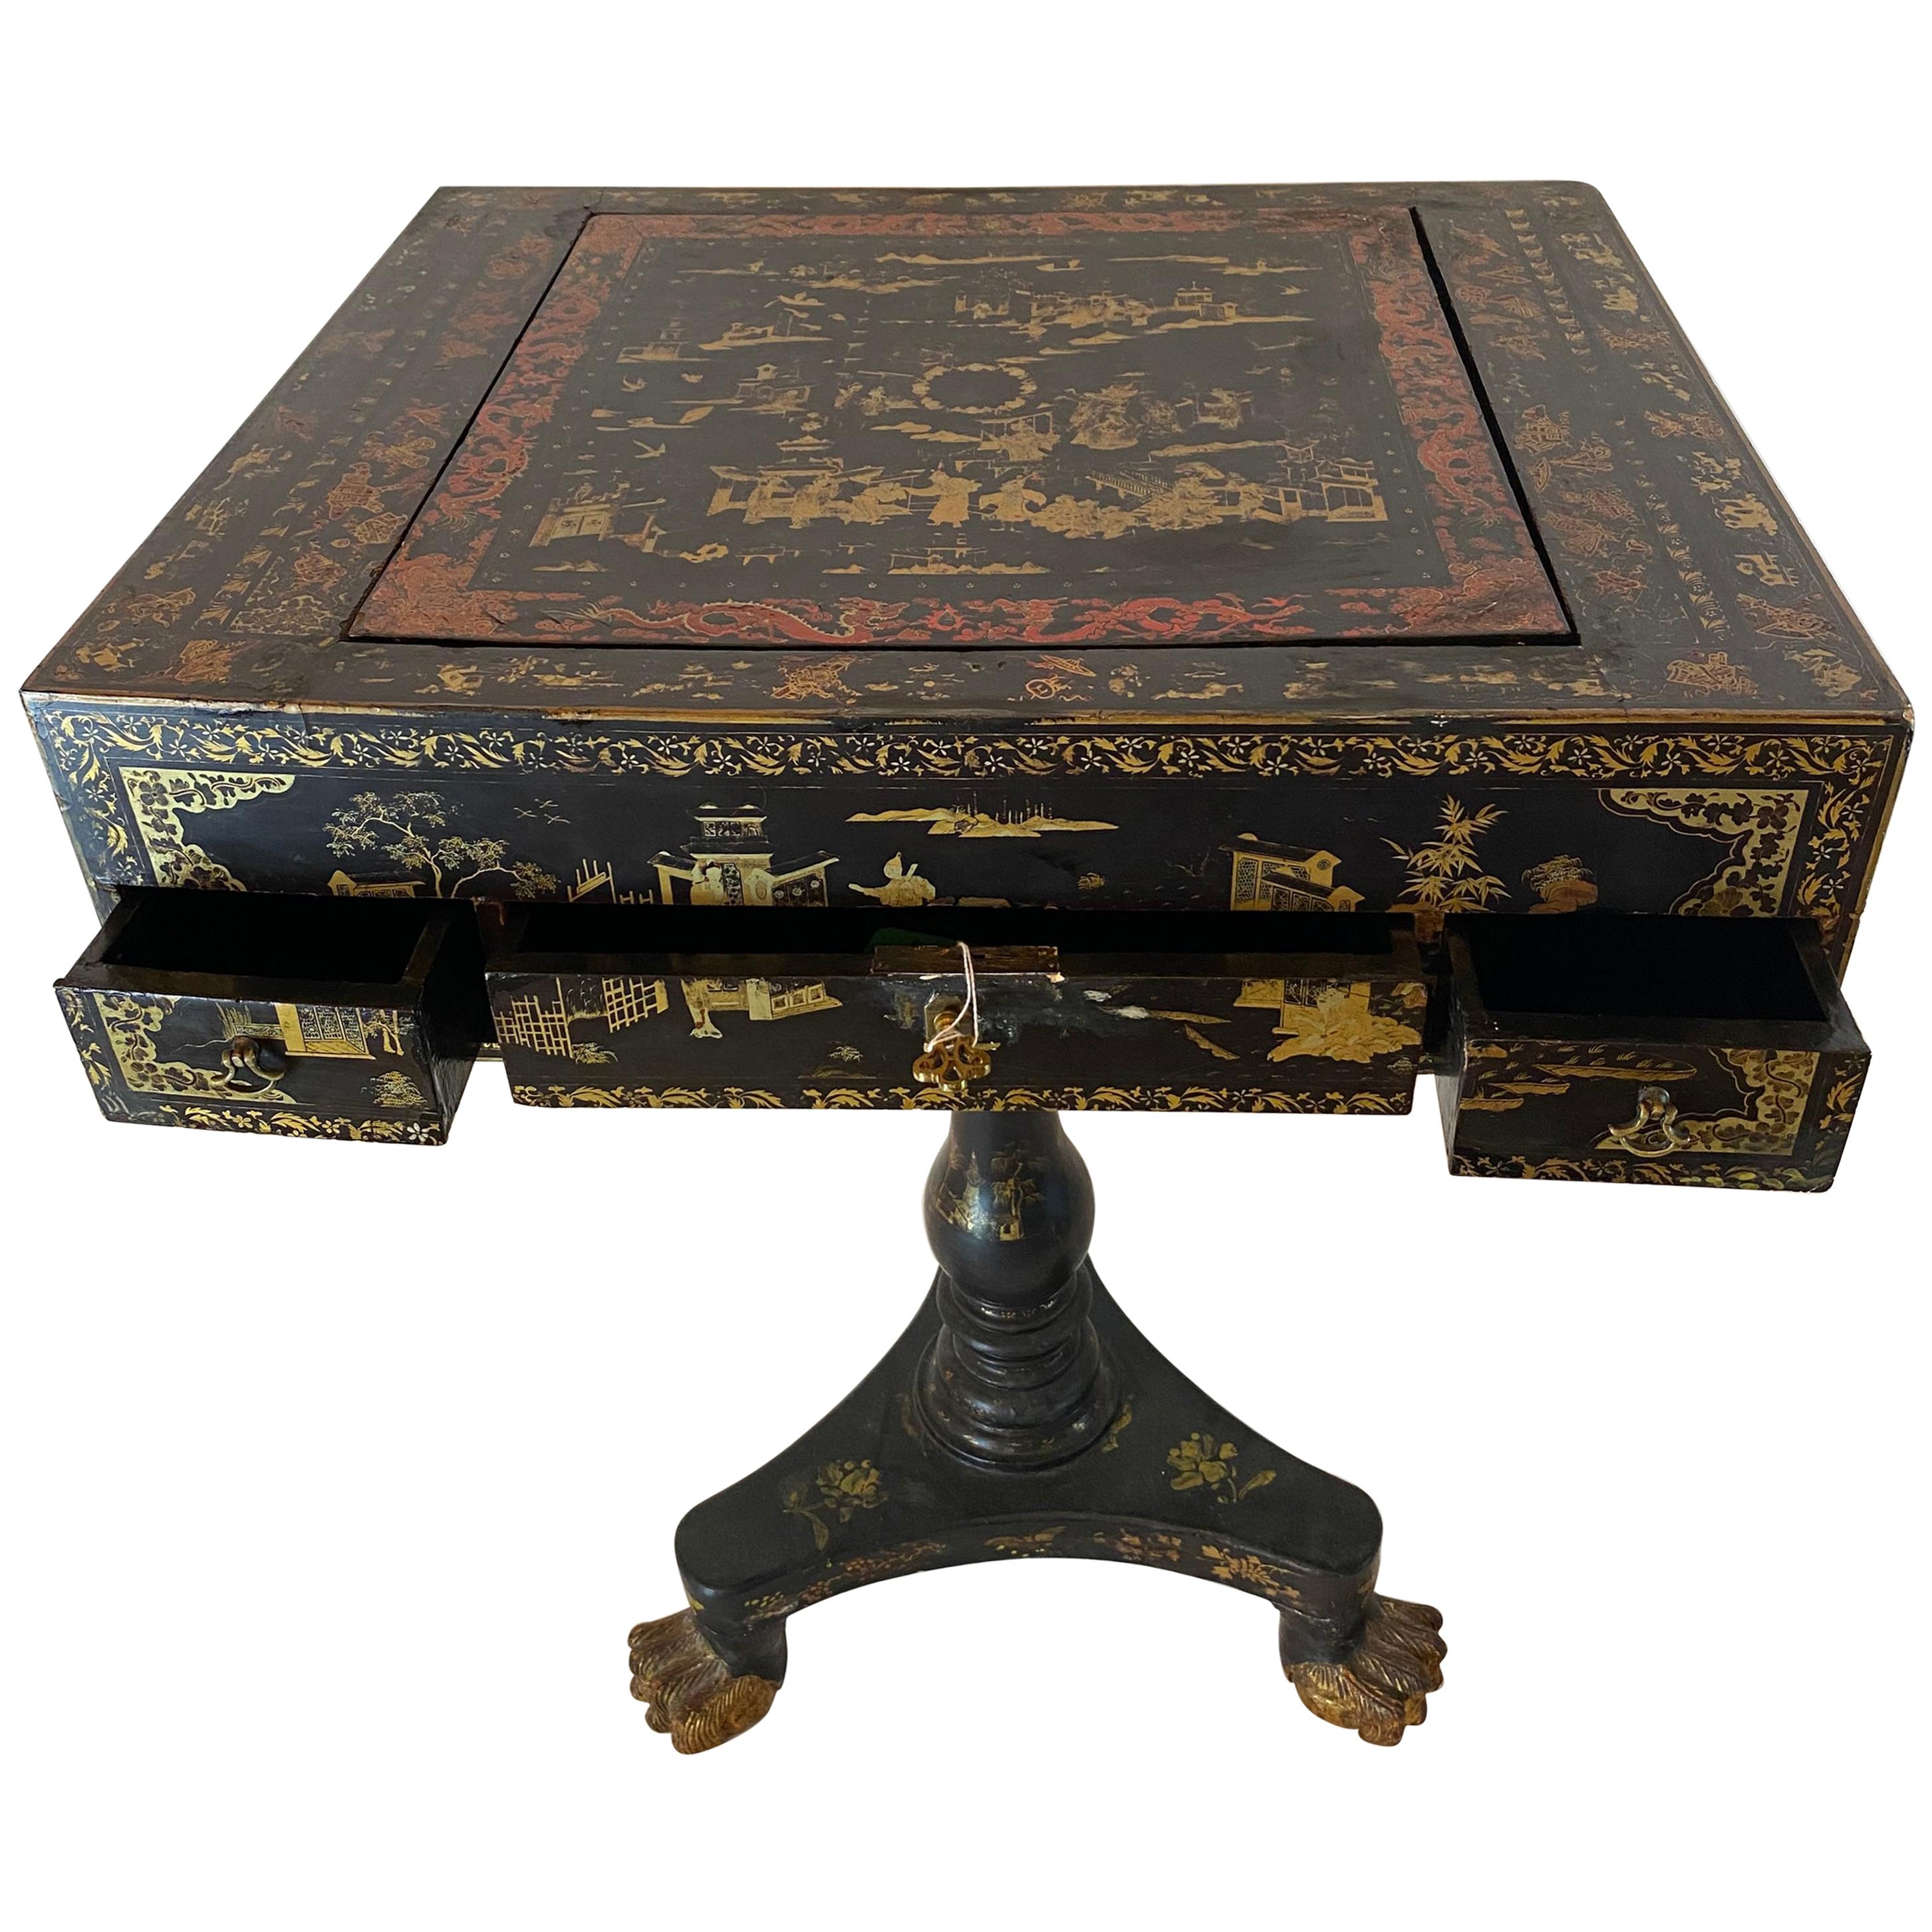 Antique 18th Century Export Chinese Lacquer Gaming Table